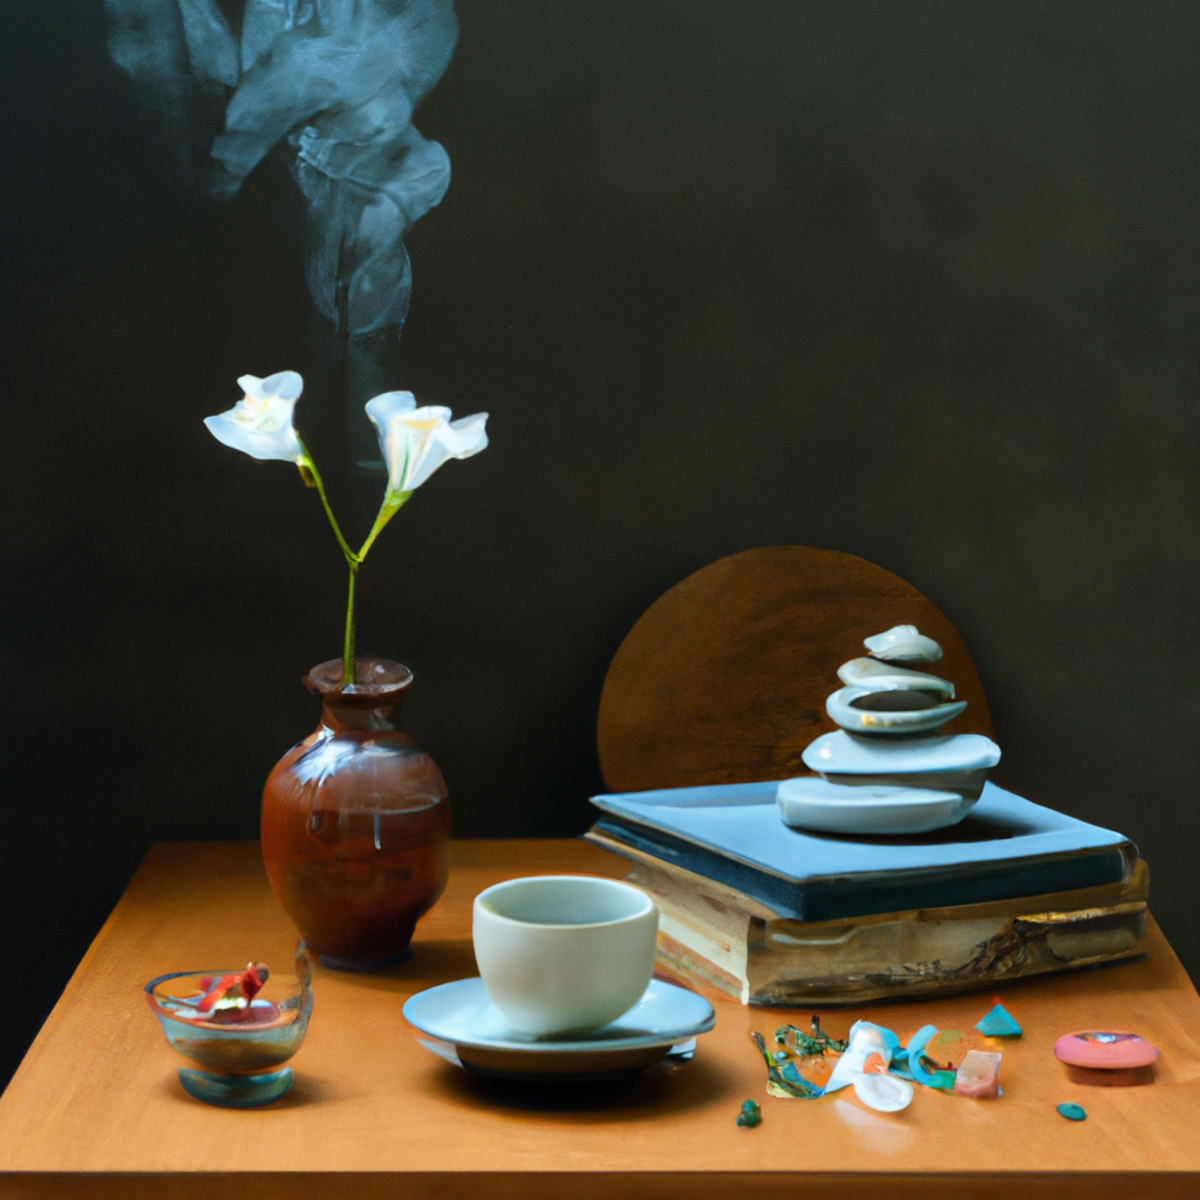 Serene wooden table with books, tea, vase, stones, and figurine, bathed in warm natural light.